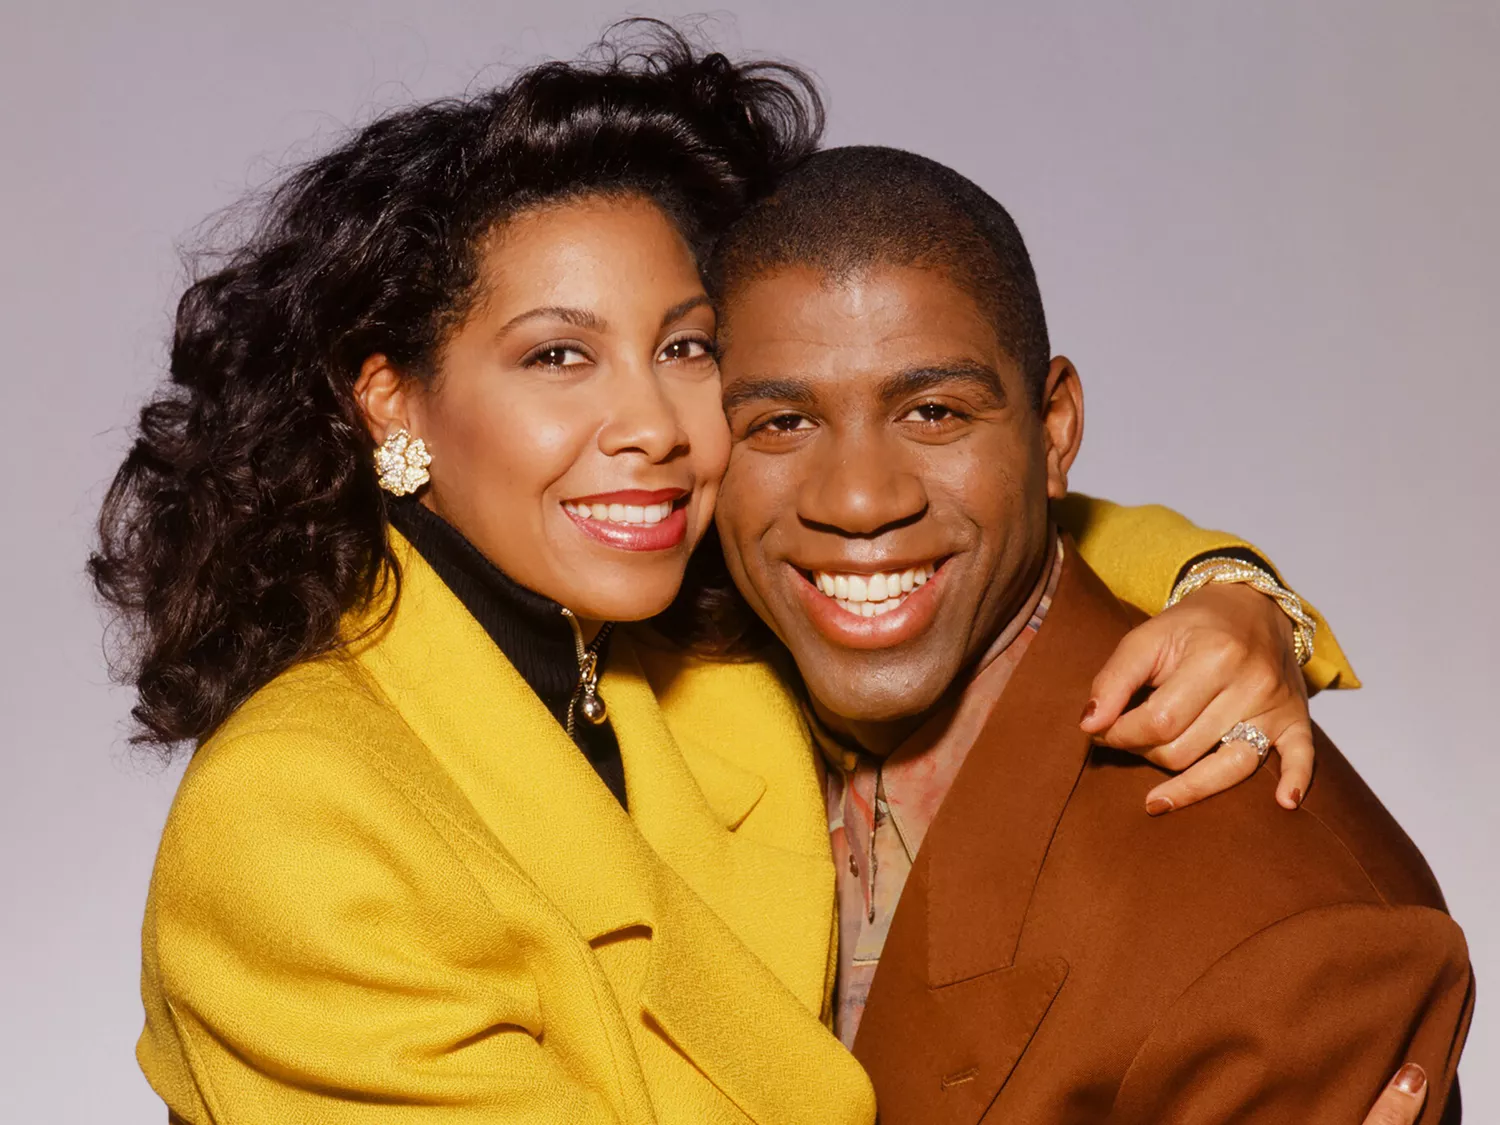 God Really Blessed Me,' Magic Johnson said, crediting his wife Cookie for her unwavering support during the disease of the century process